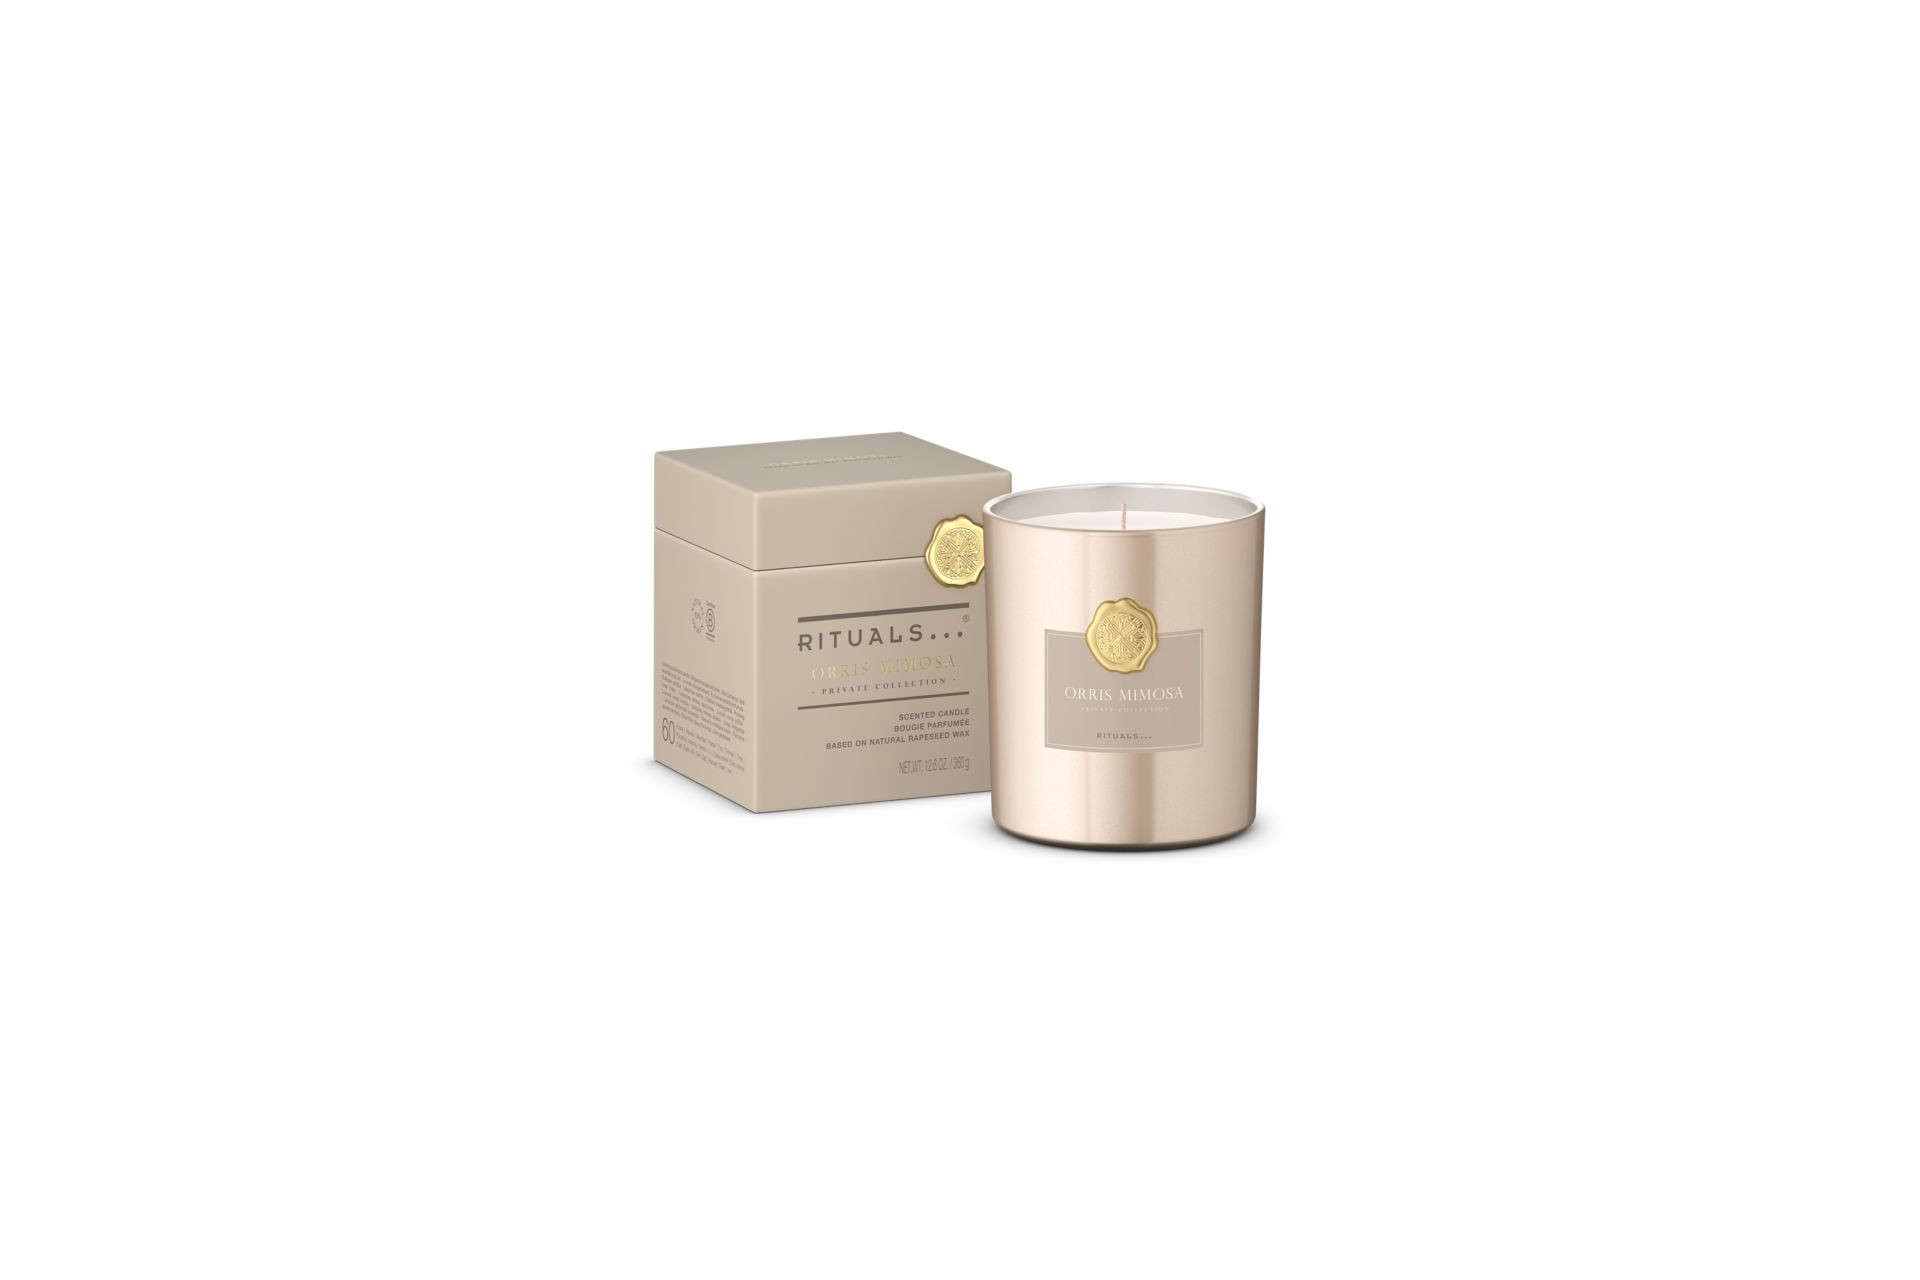 Acheter Rituals Orris Mimosa Scented Candle